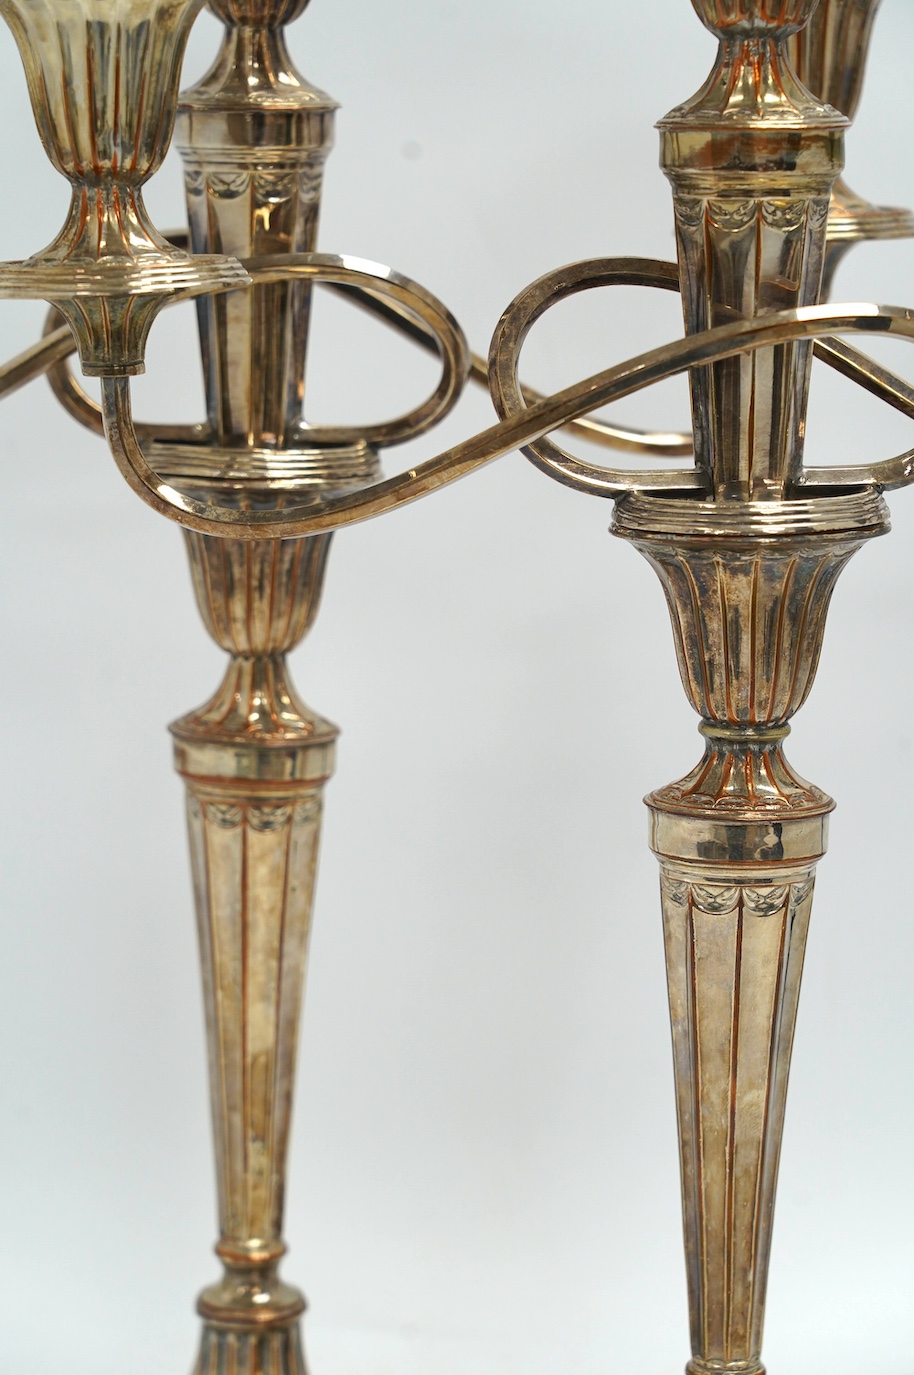 A pair of 19th century Old Sheffield plate three light, two branch candelabra, 44cm high. Condition - fair to good